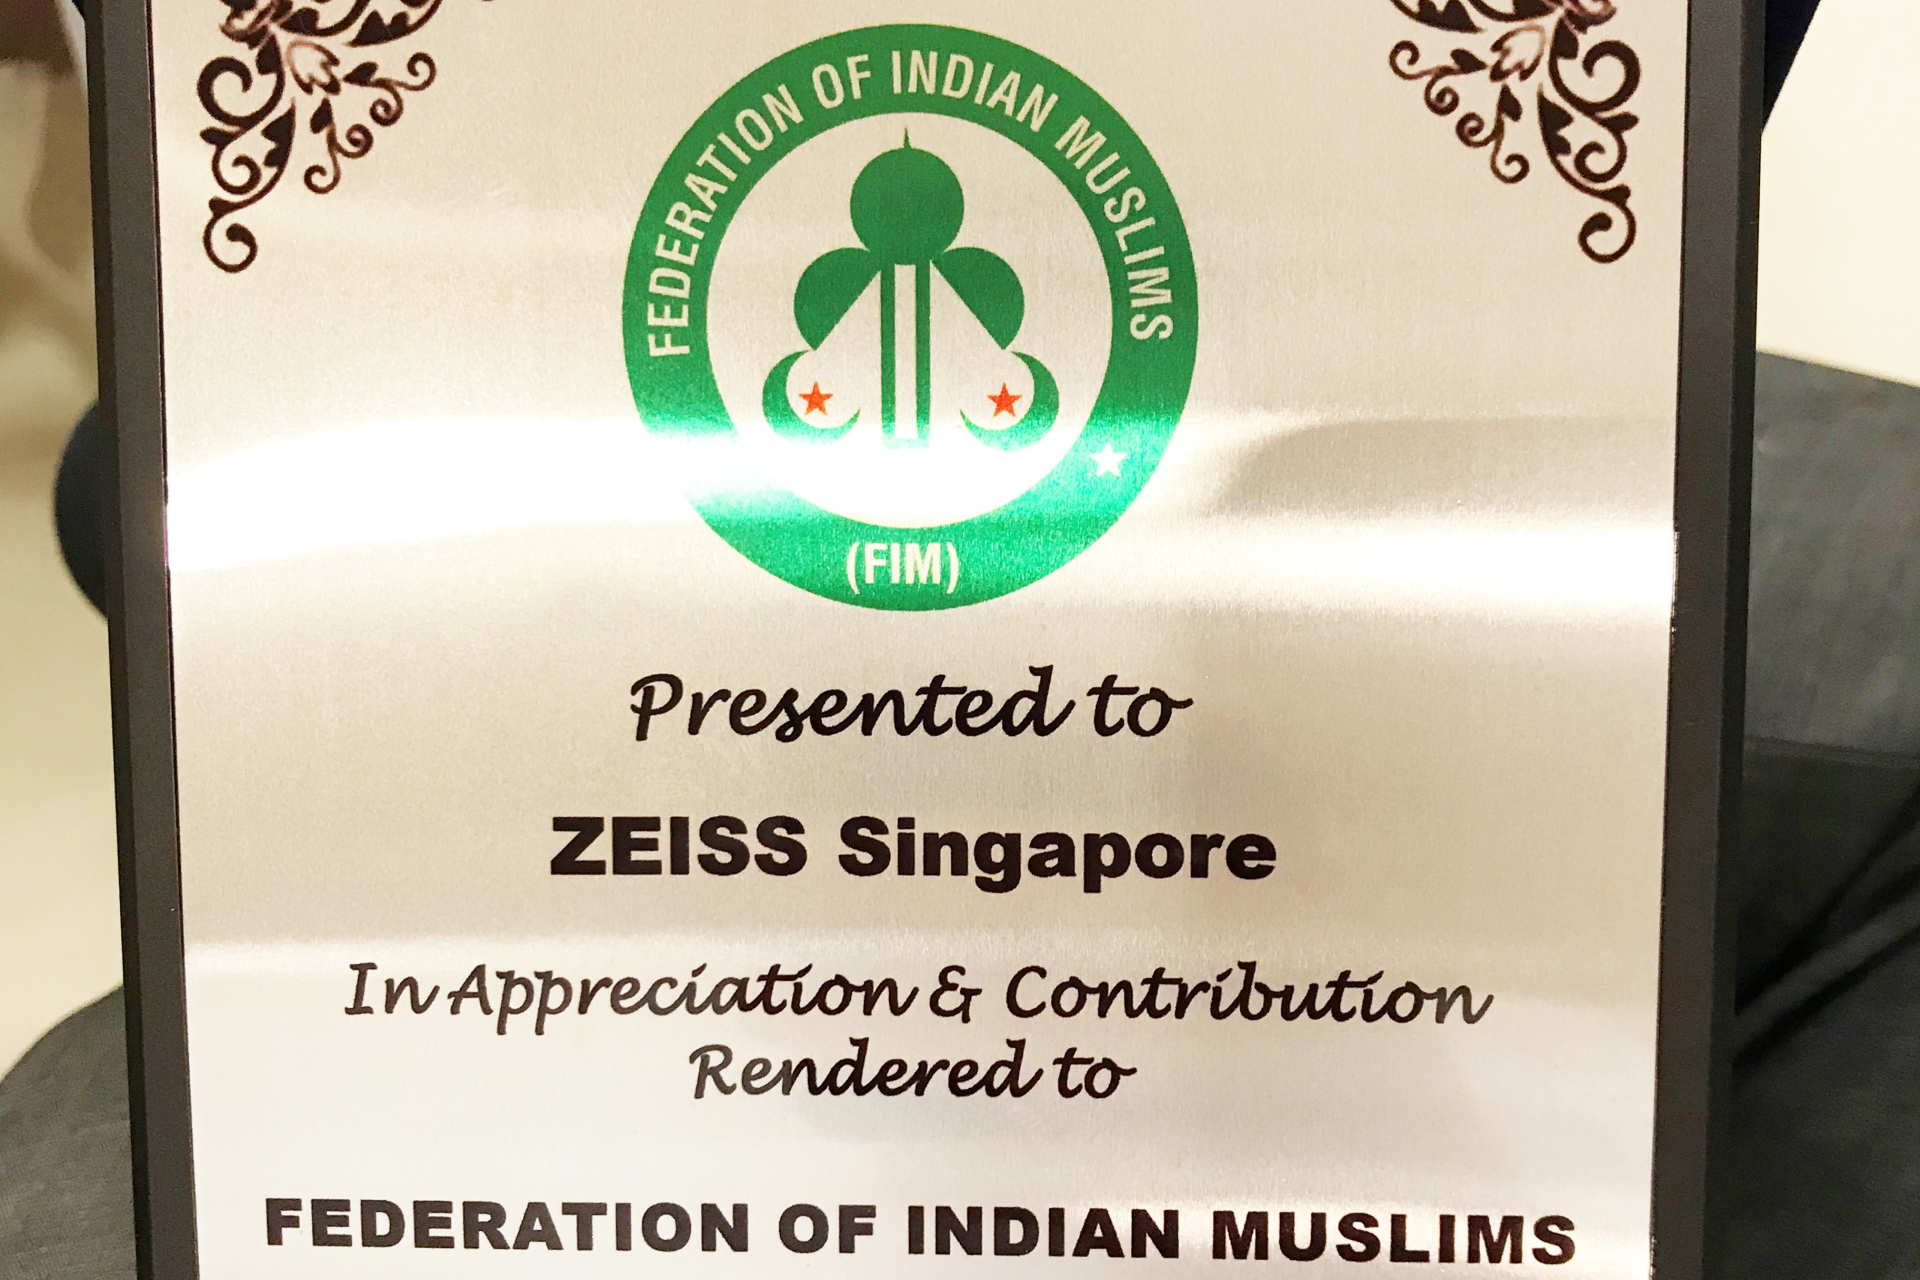 Image of a certificate from Federation of Indian Muslims presented to ZEISS Singapore in appreciation and contribution 